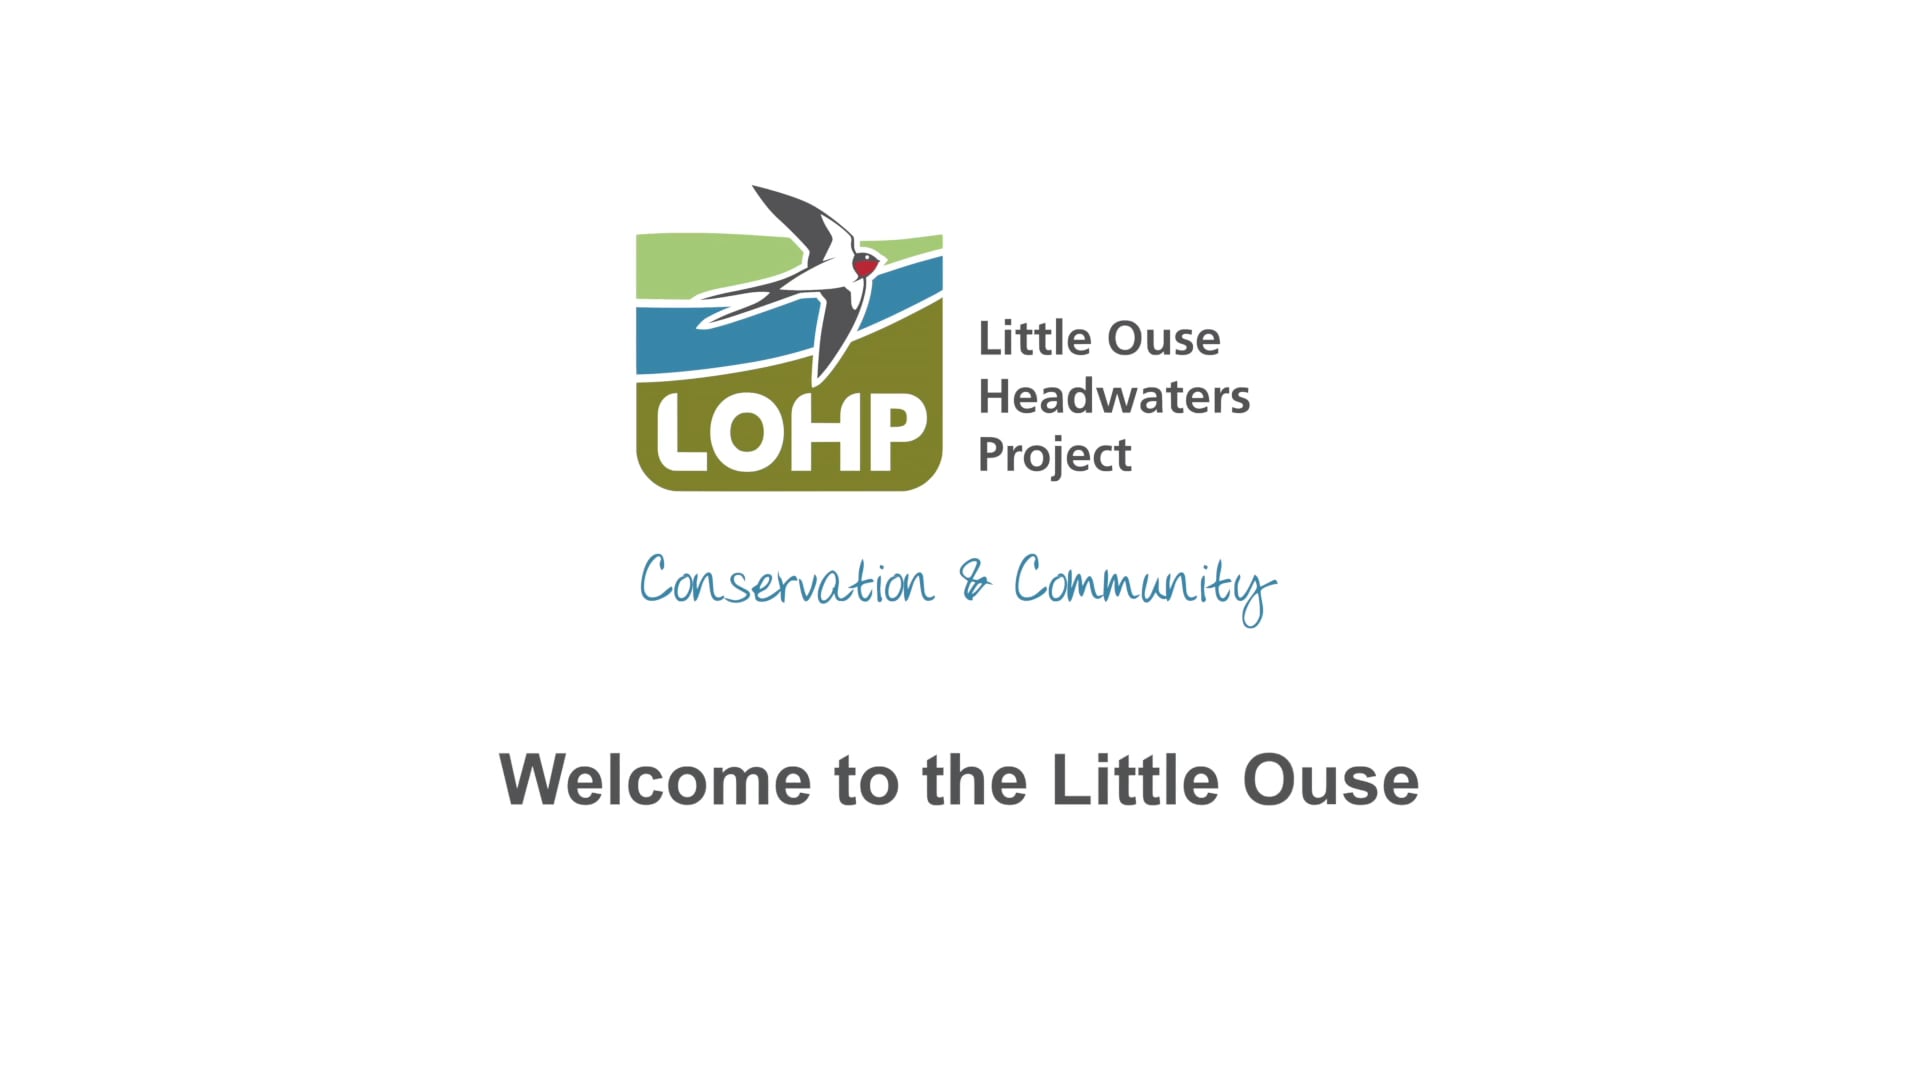 The Little Ouse Headwaters Project